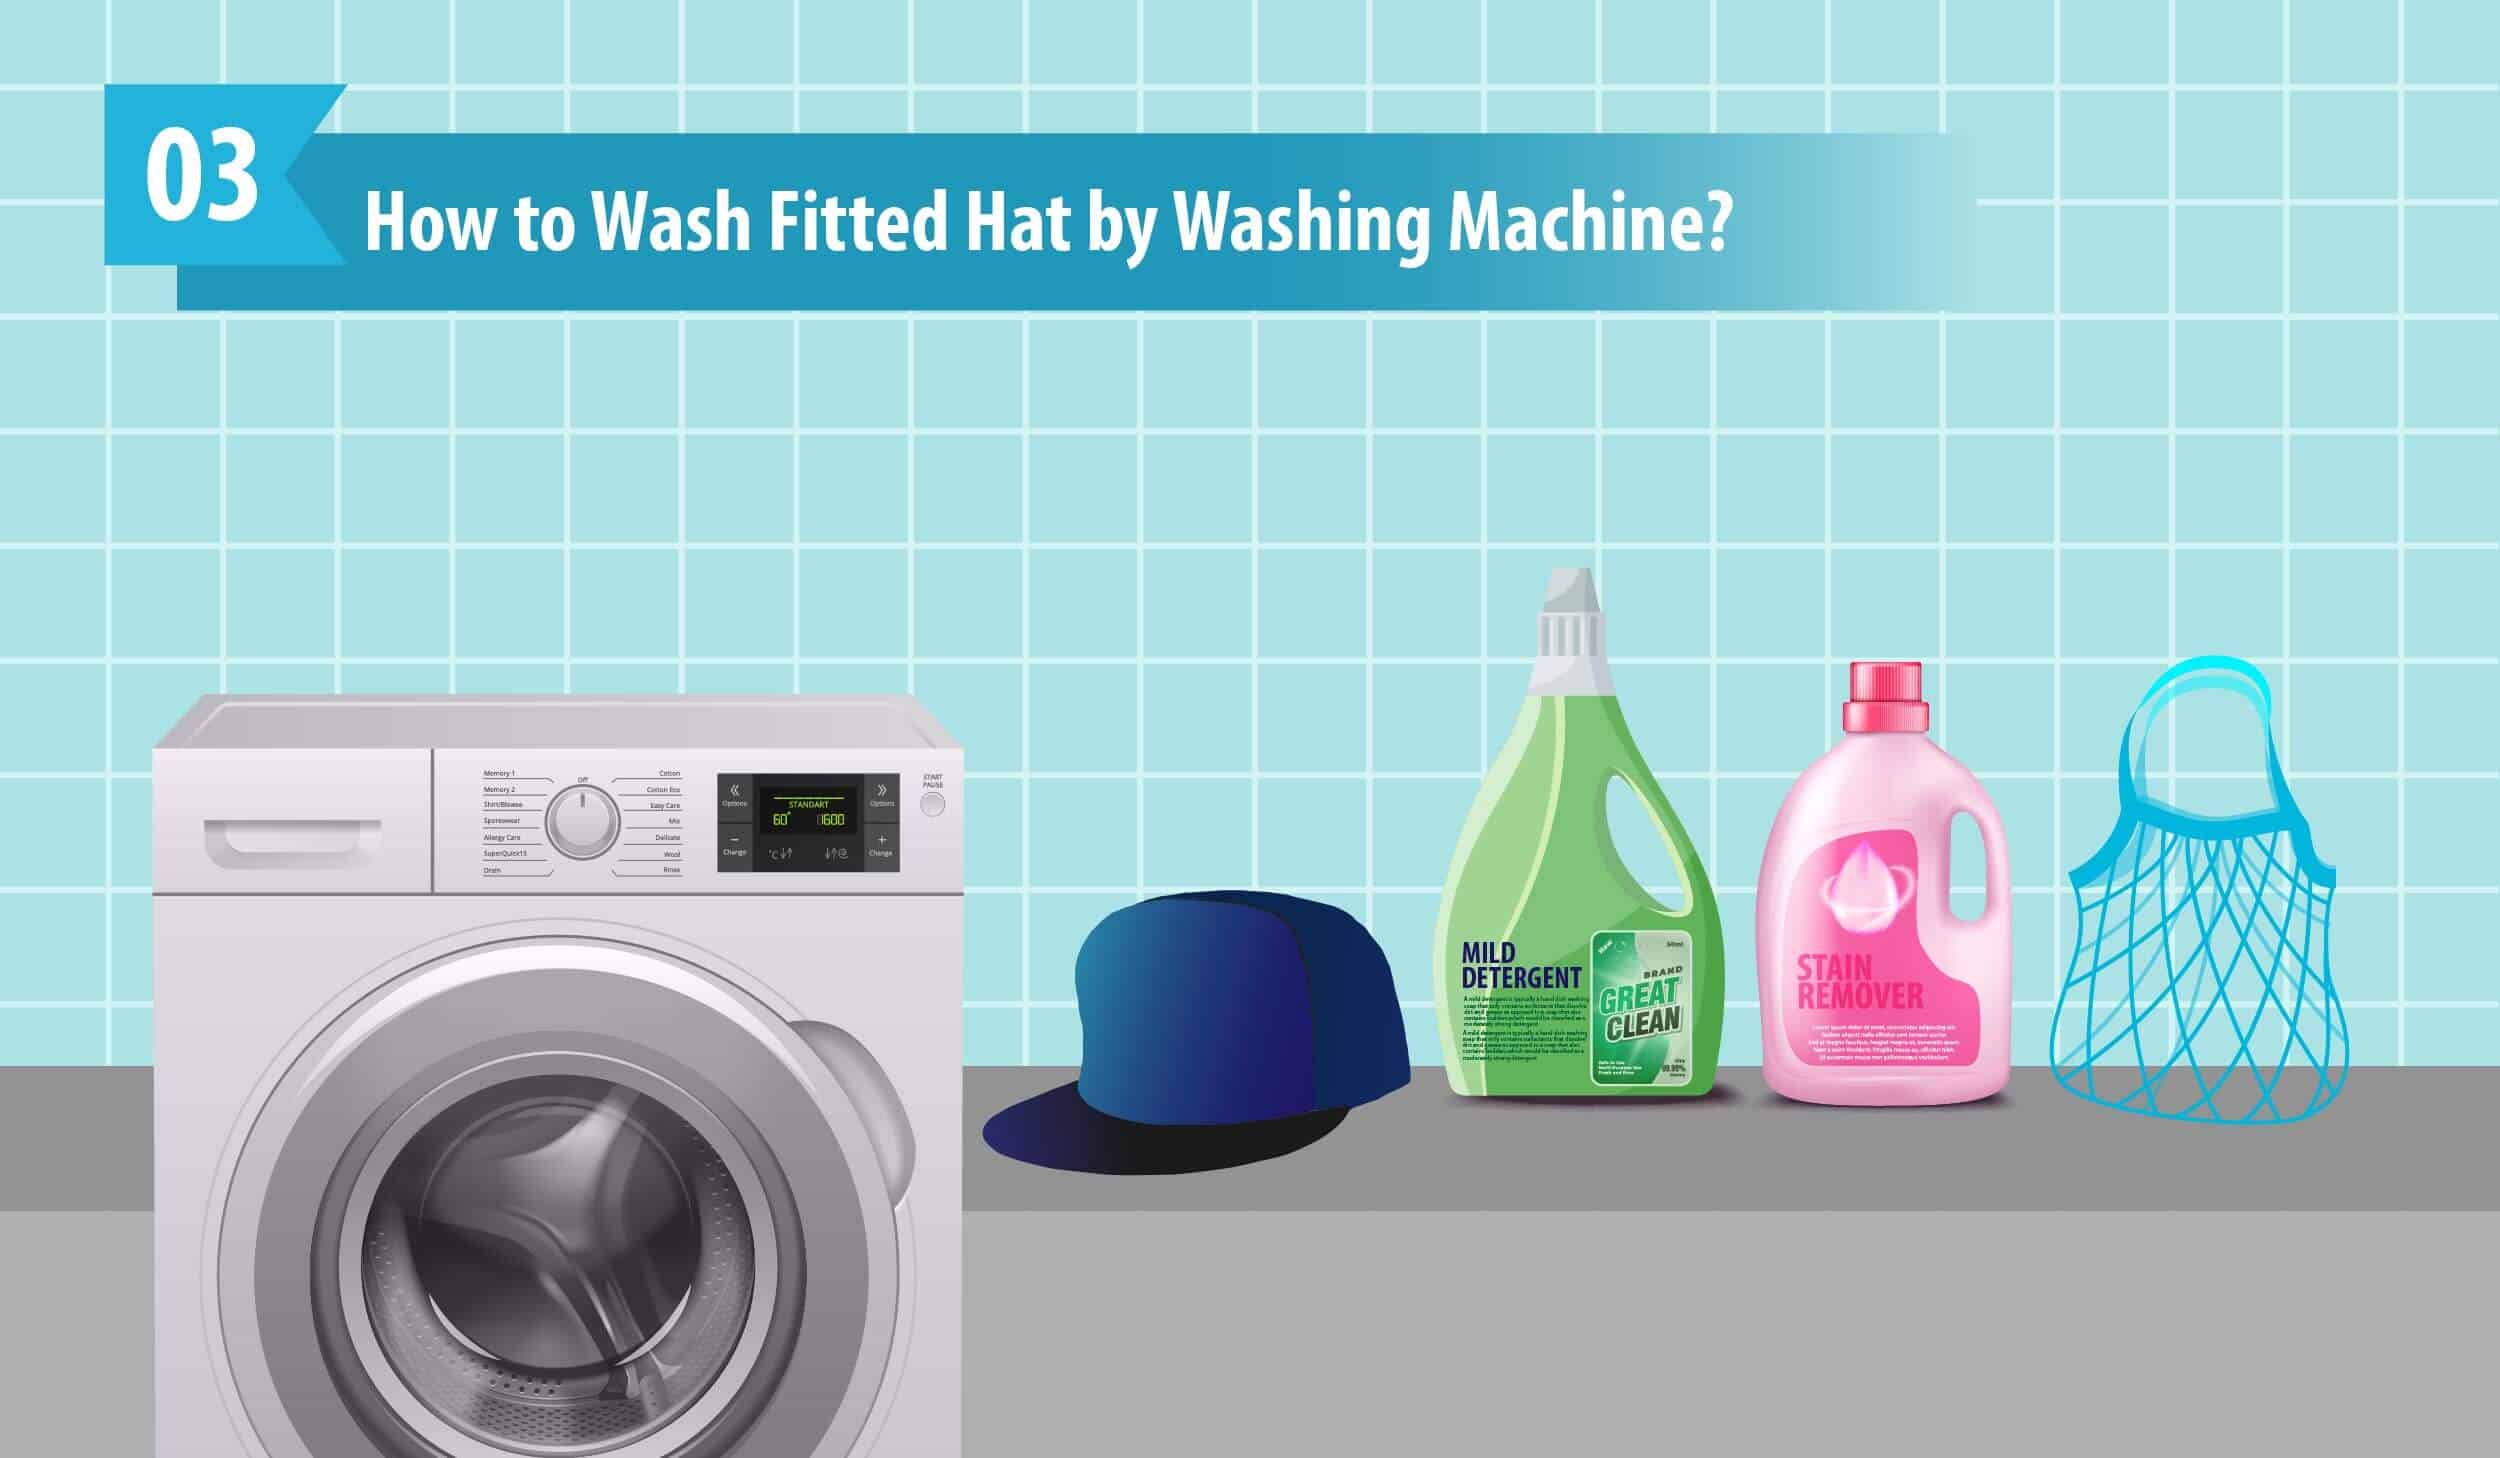 How to Wash Fitted Hat by Washing Machine